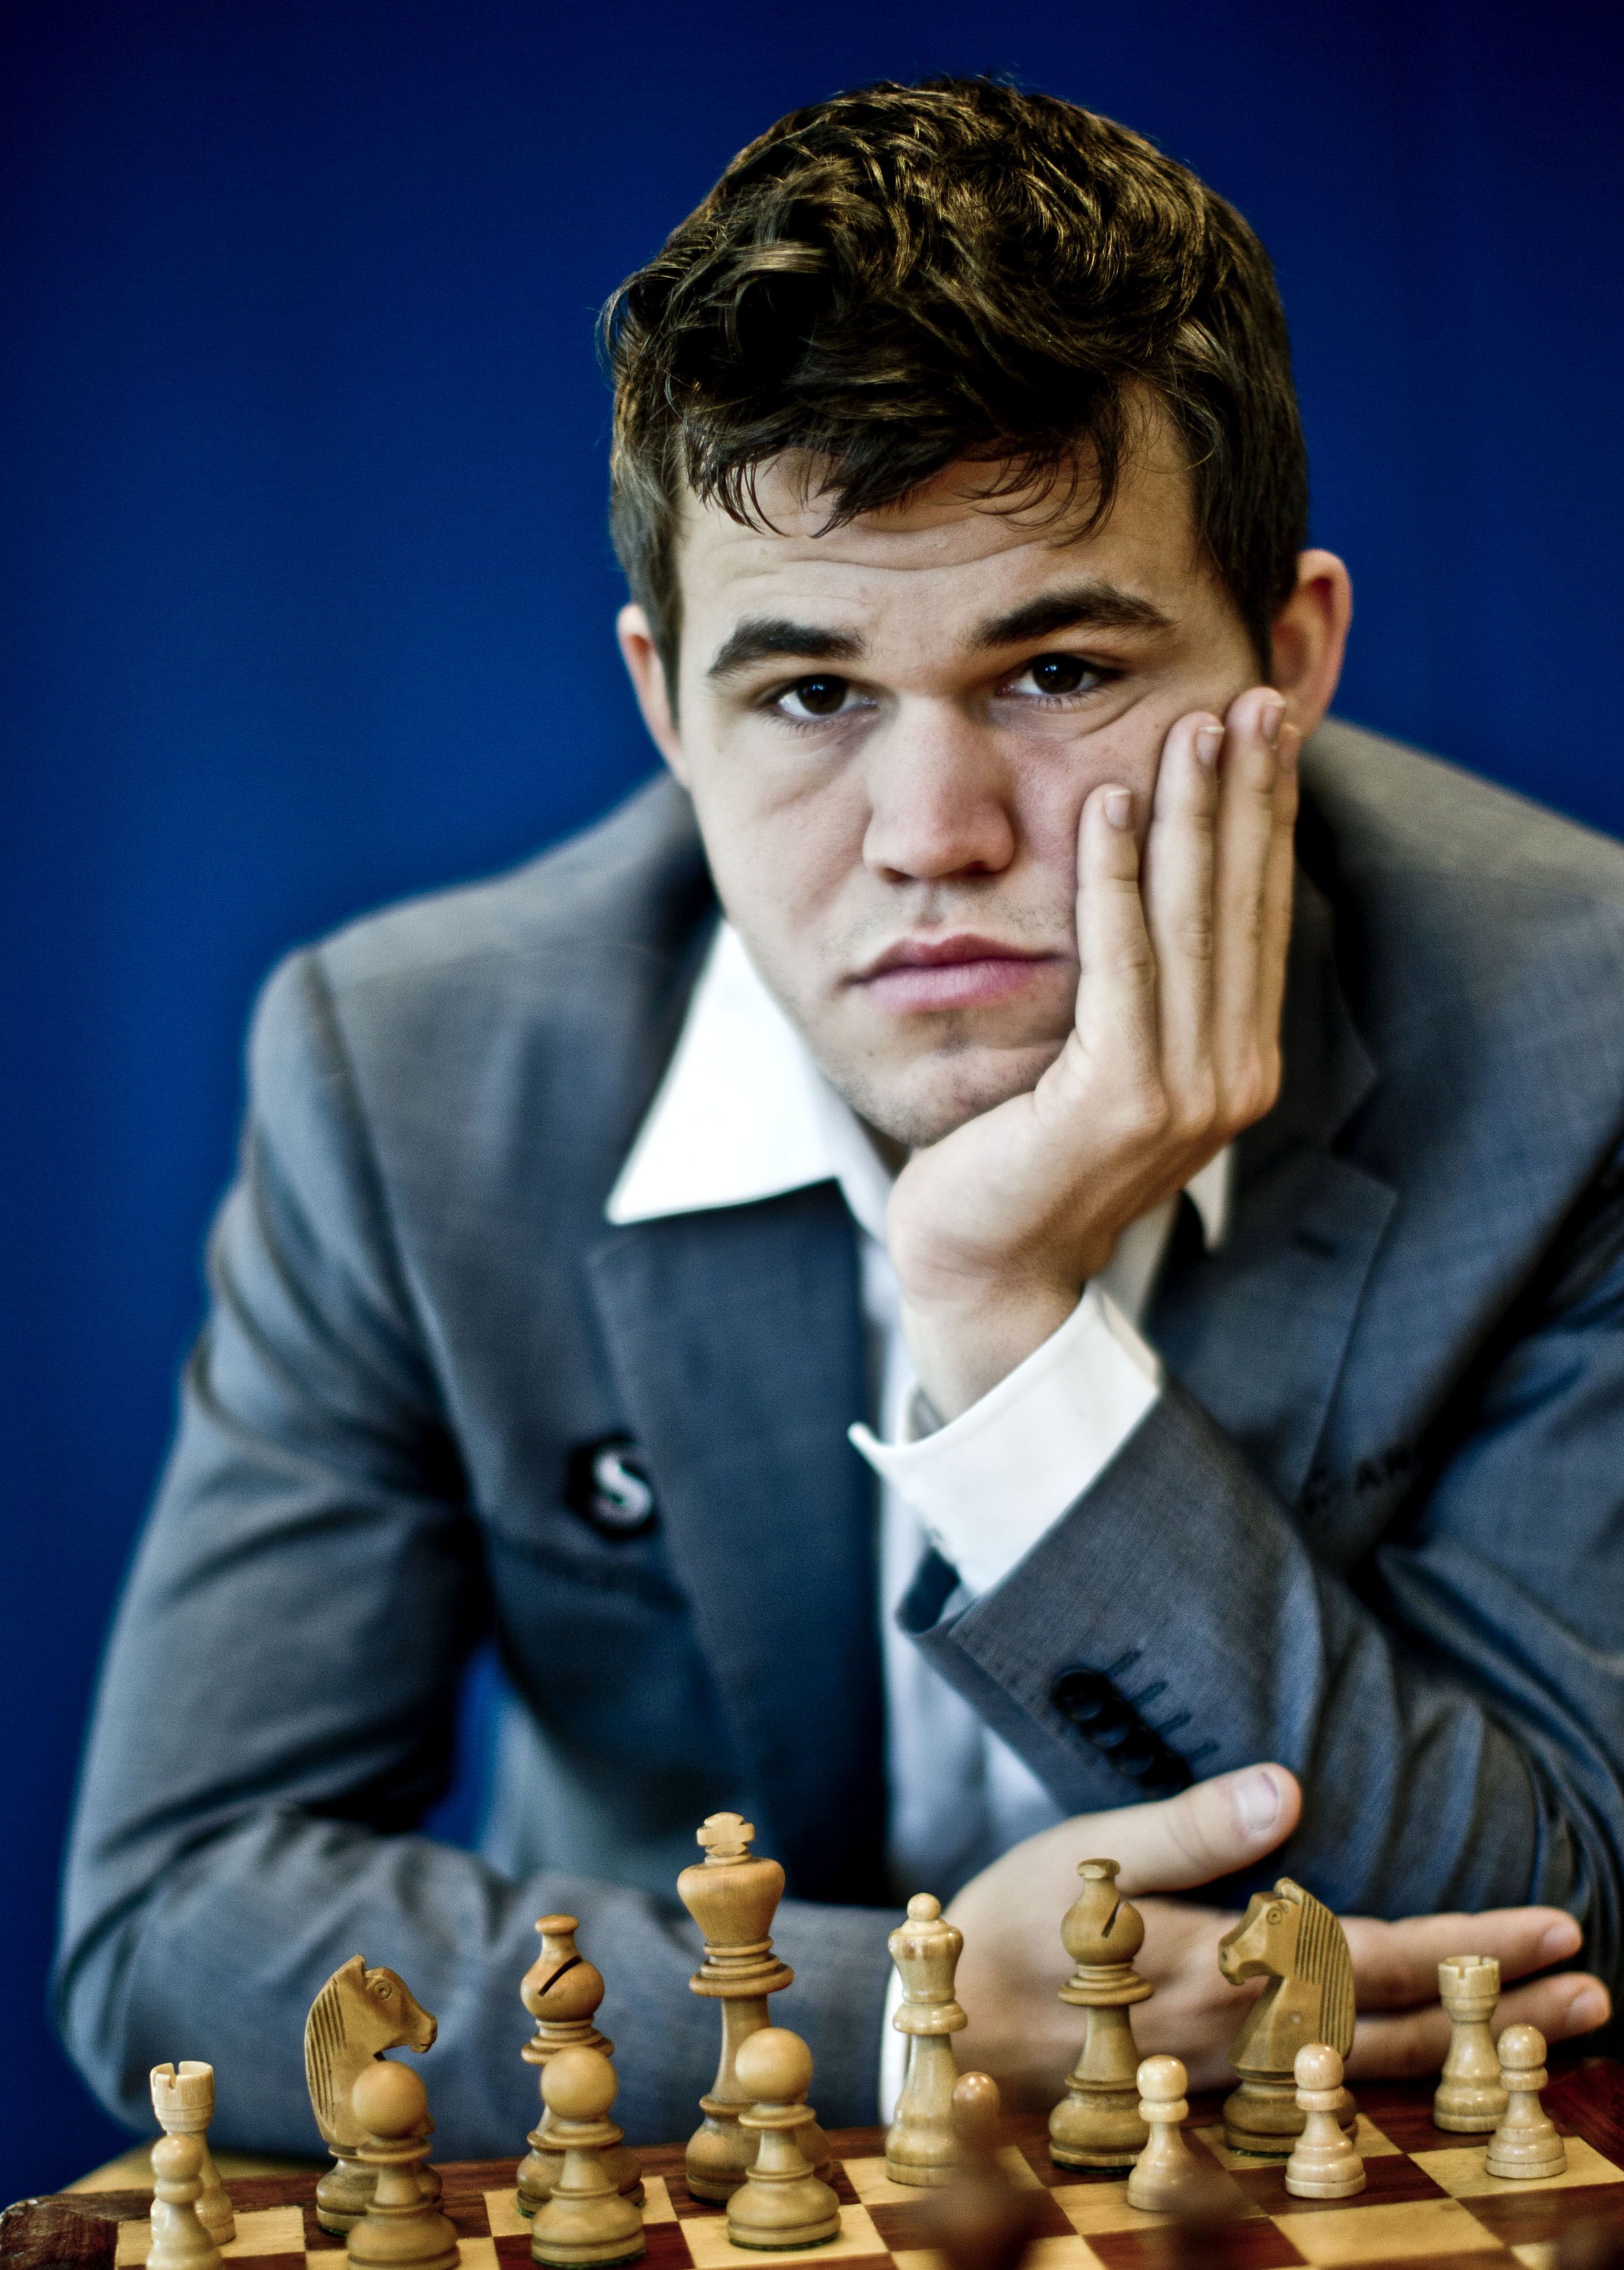 Magnus Carlsen: The Best Chess Player of All Time – royalchessmall